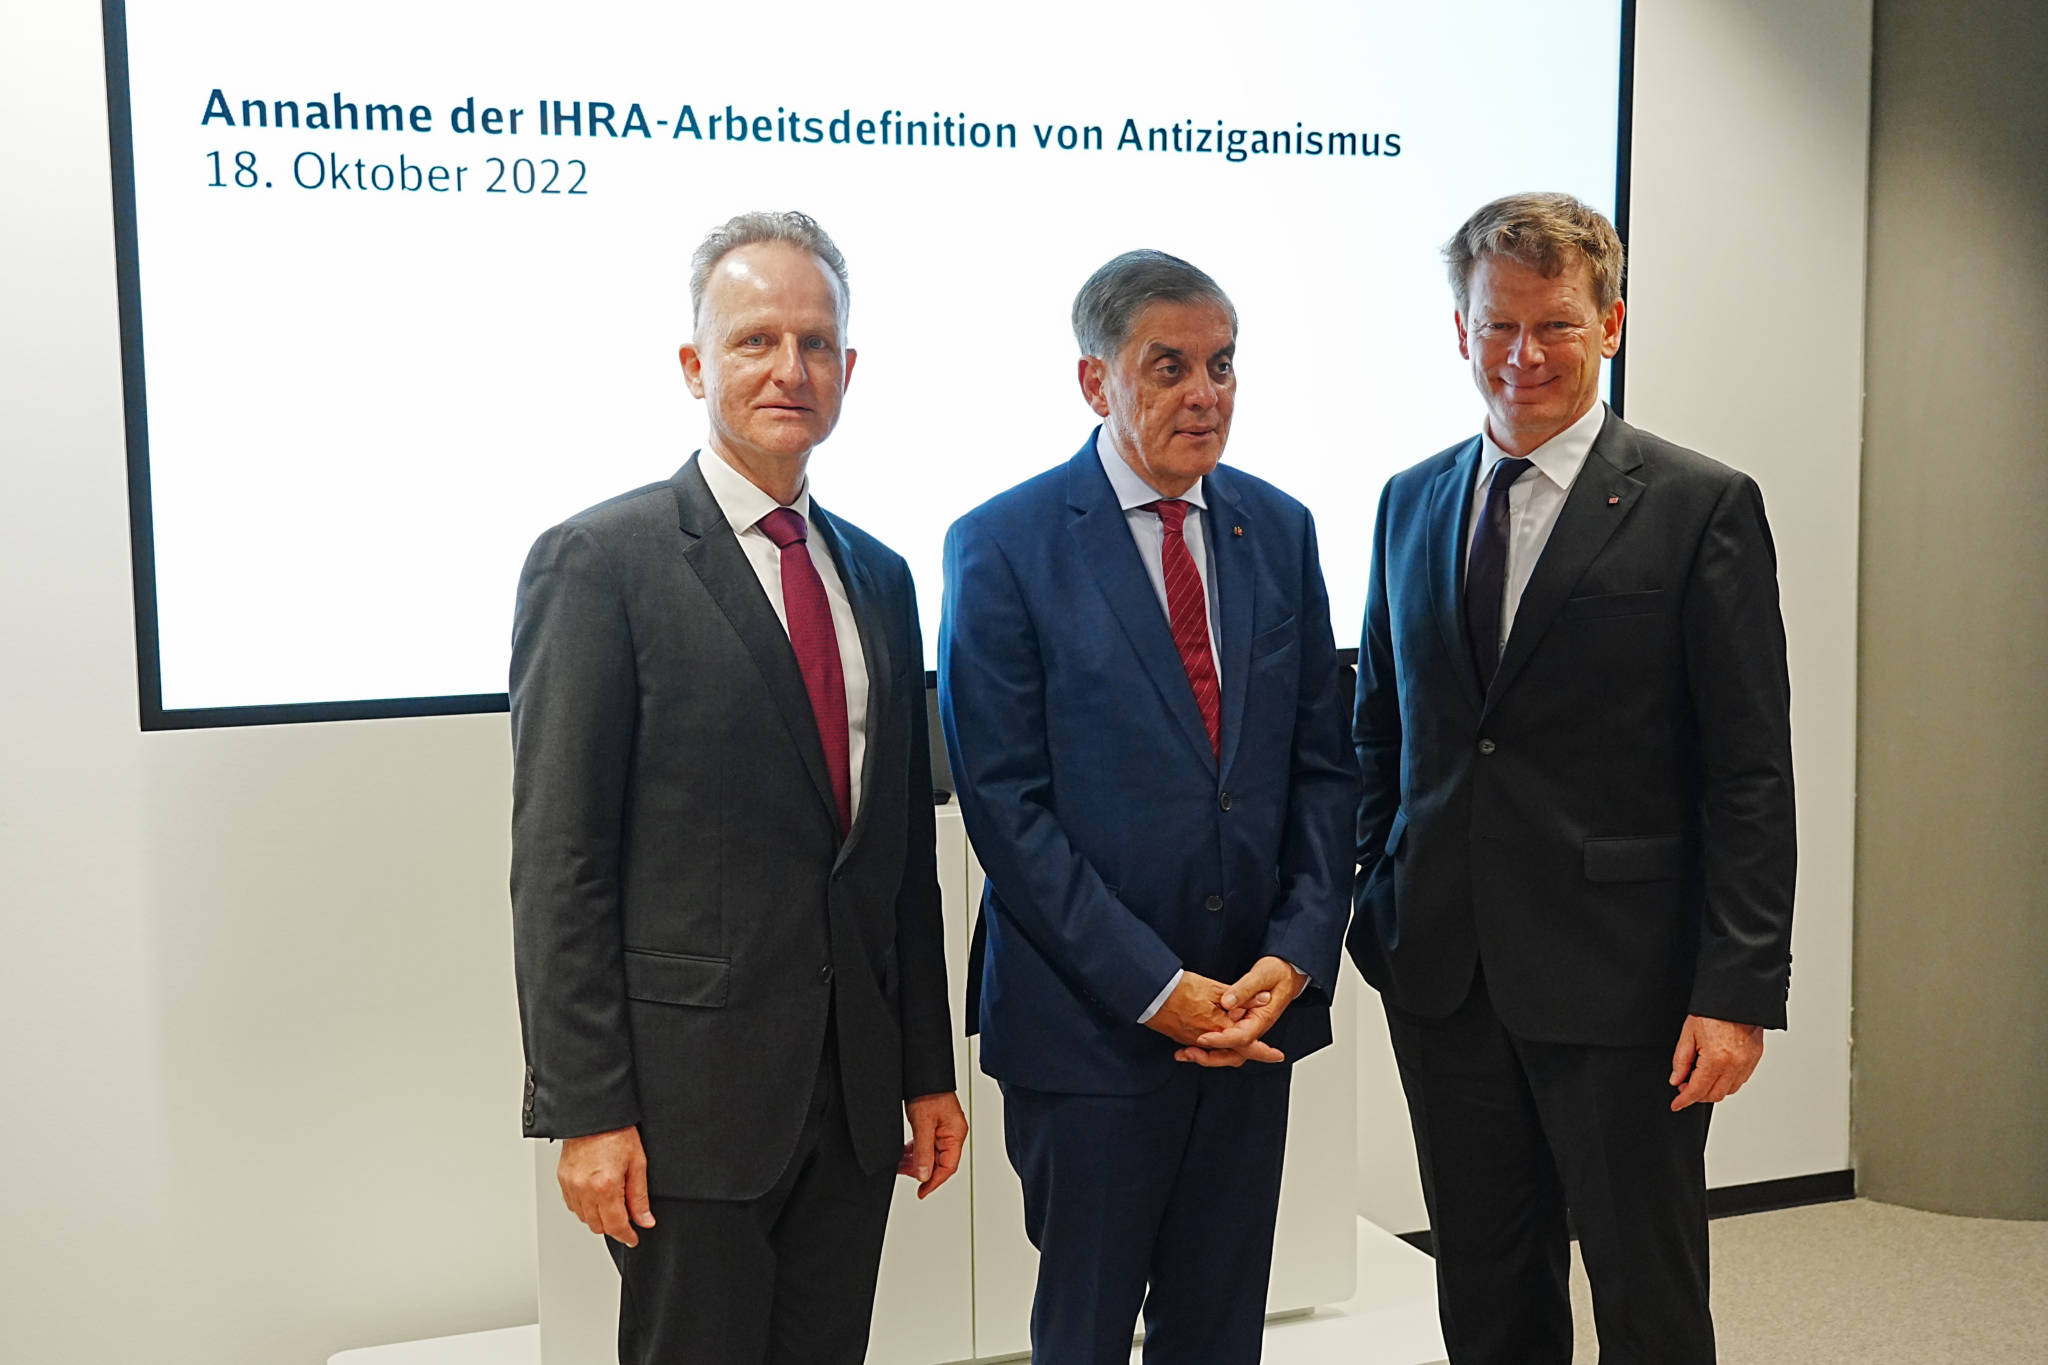 Adoption of the working definition of antigypsyism of the International Holocaust Remembrance Alliance (IHRA) by the Deutsche Bahn. Photo (from left to right): Robert Klinke, PhD , Special Representative of the Federal Foreign Office for Holocaust Remembrance and International Affairs of the Sinti and Roma, Romani Rose, Chairman of the Central, and Richard Lutz, PhD, Chairman of the Board of Deutsche Bahn, on 18 October 2022 at the Deutsche Bahn Group Headquarters in Berlin. © Deutsche Bahn AG / Volker Emersleben